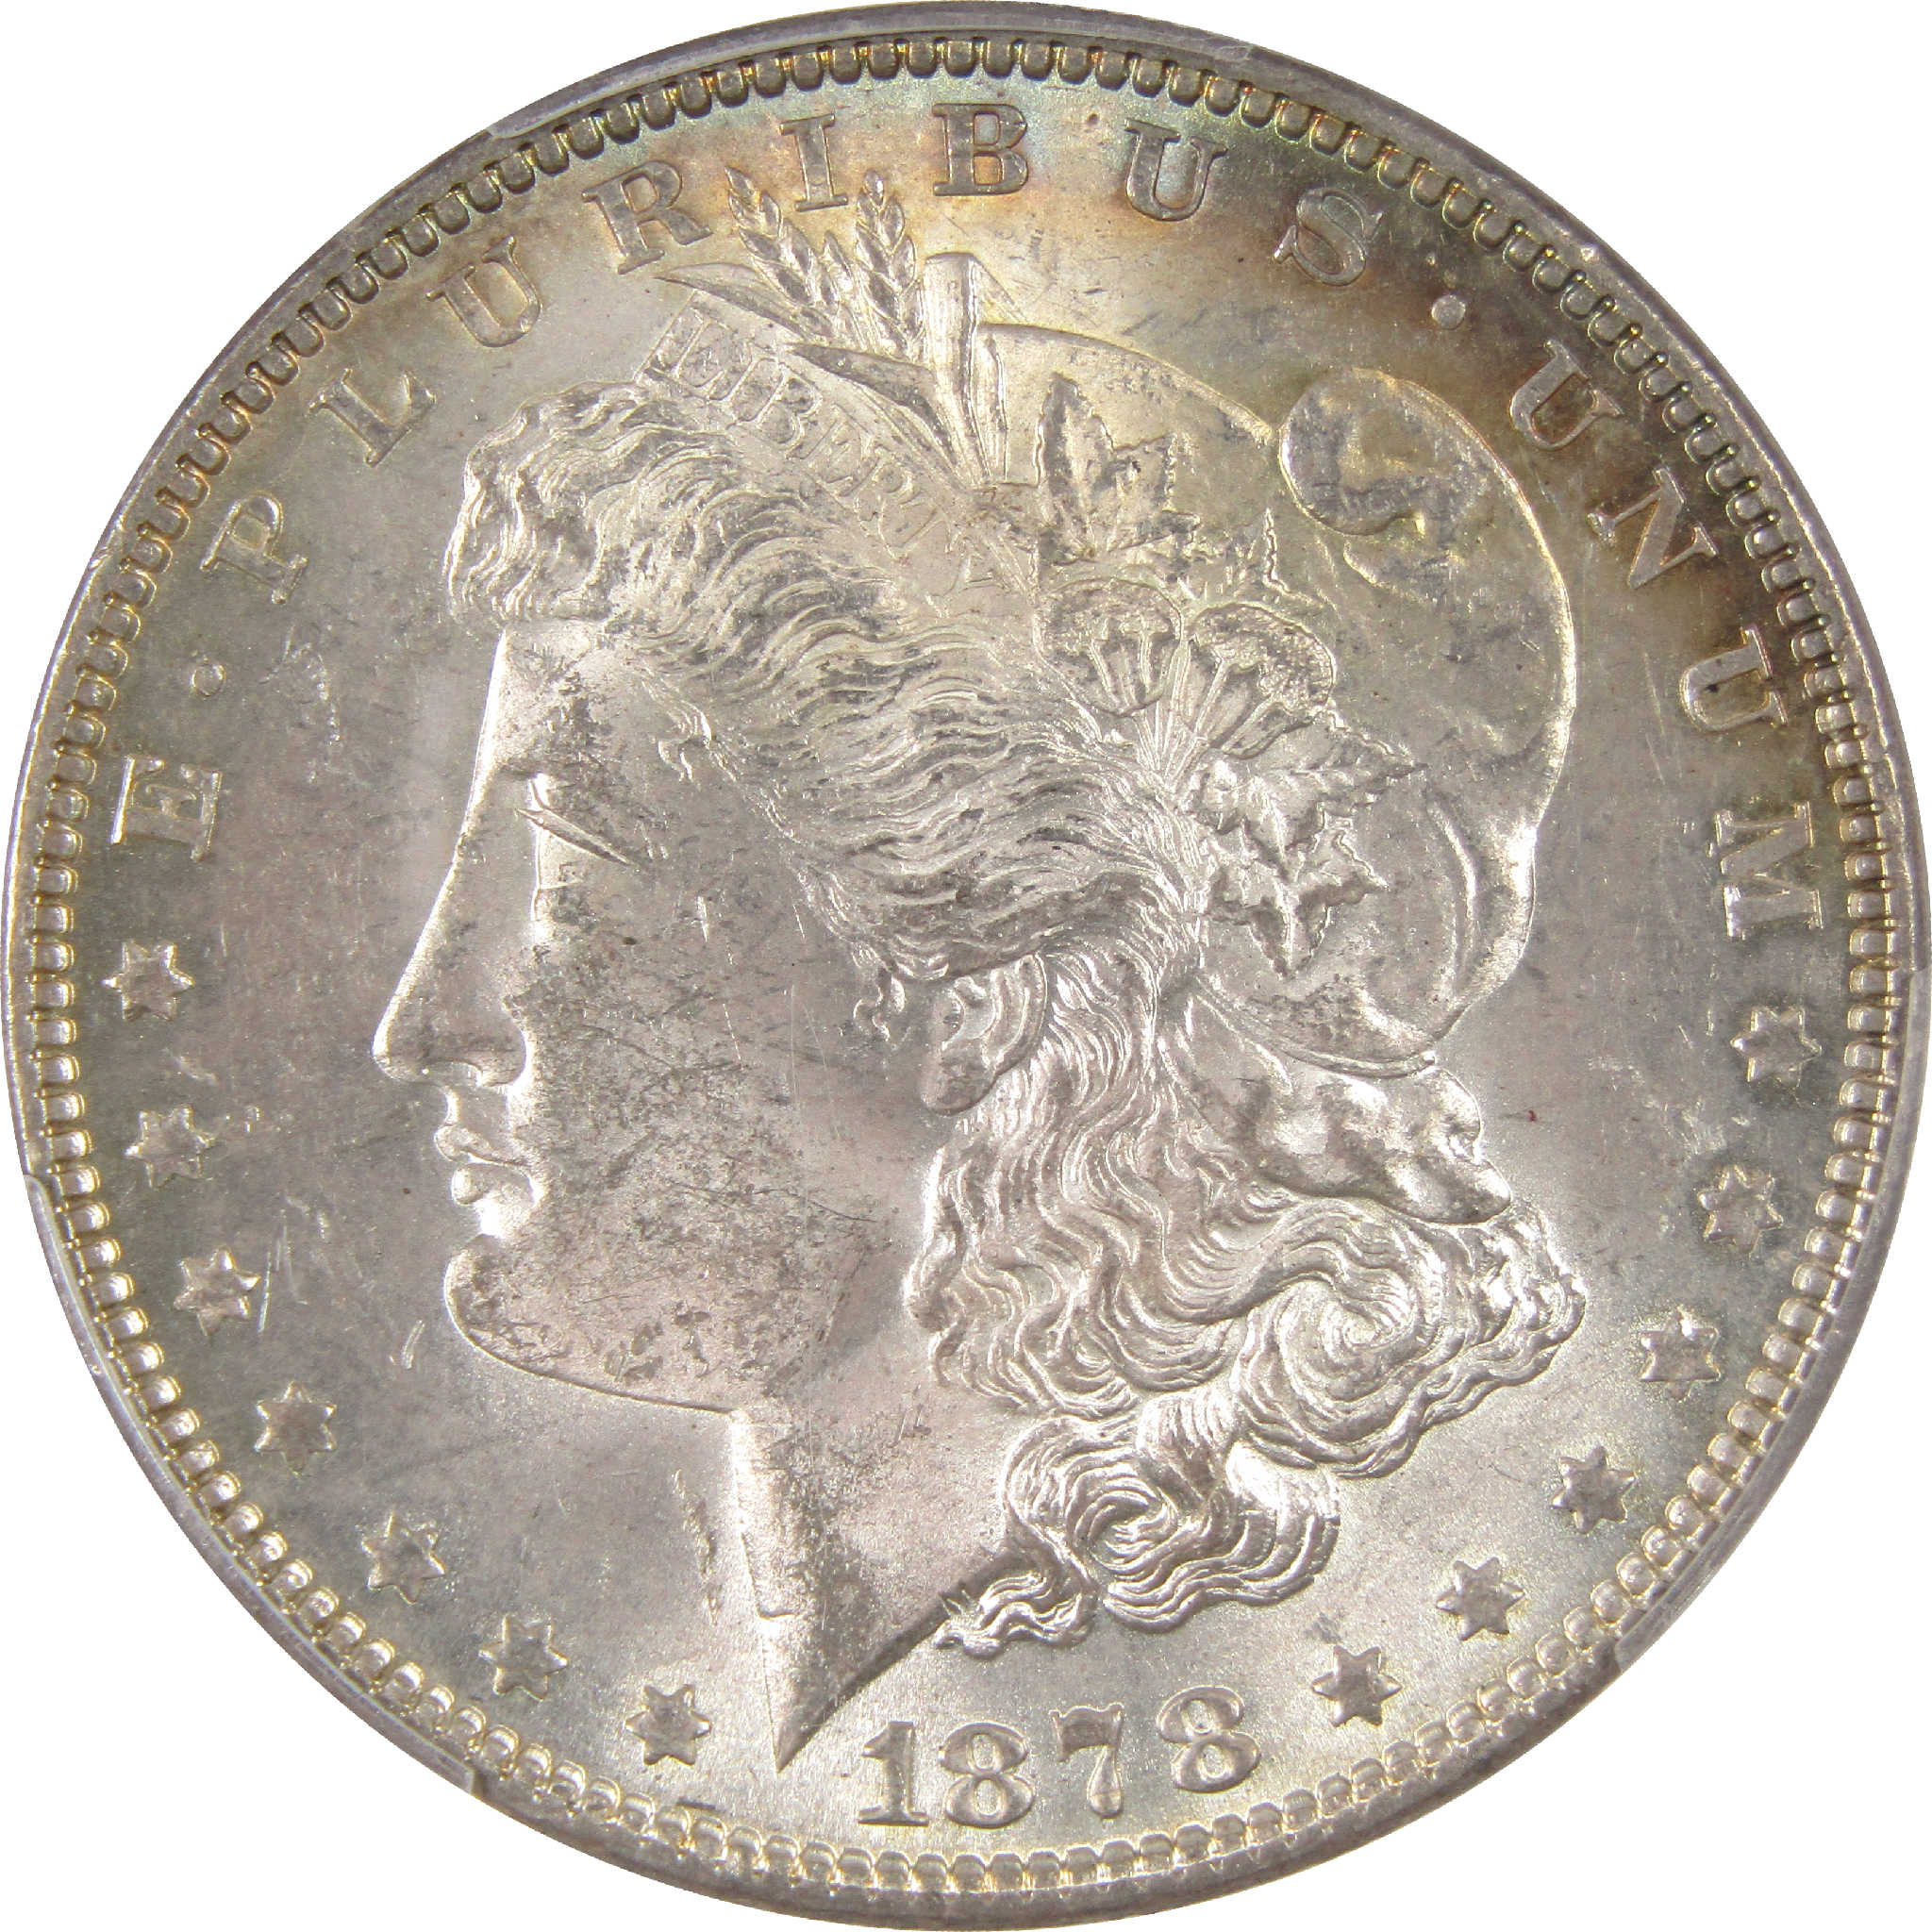 1878 7TF Rev 79 Morgan Dollar MS 62 PCGS Silver $1 Unc SKU:I11311 - Morgan coin - Morgan silver dollar - Morgan silver dollar for sale - Profile Coins &amp; Collectibles